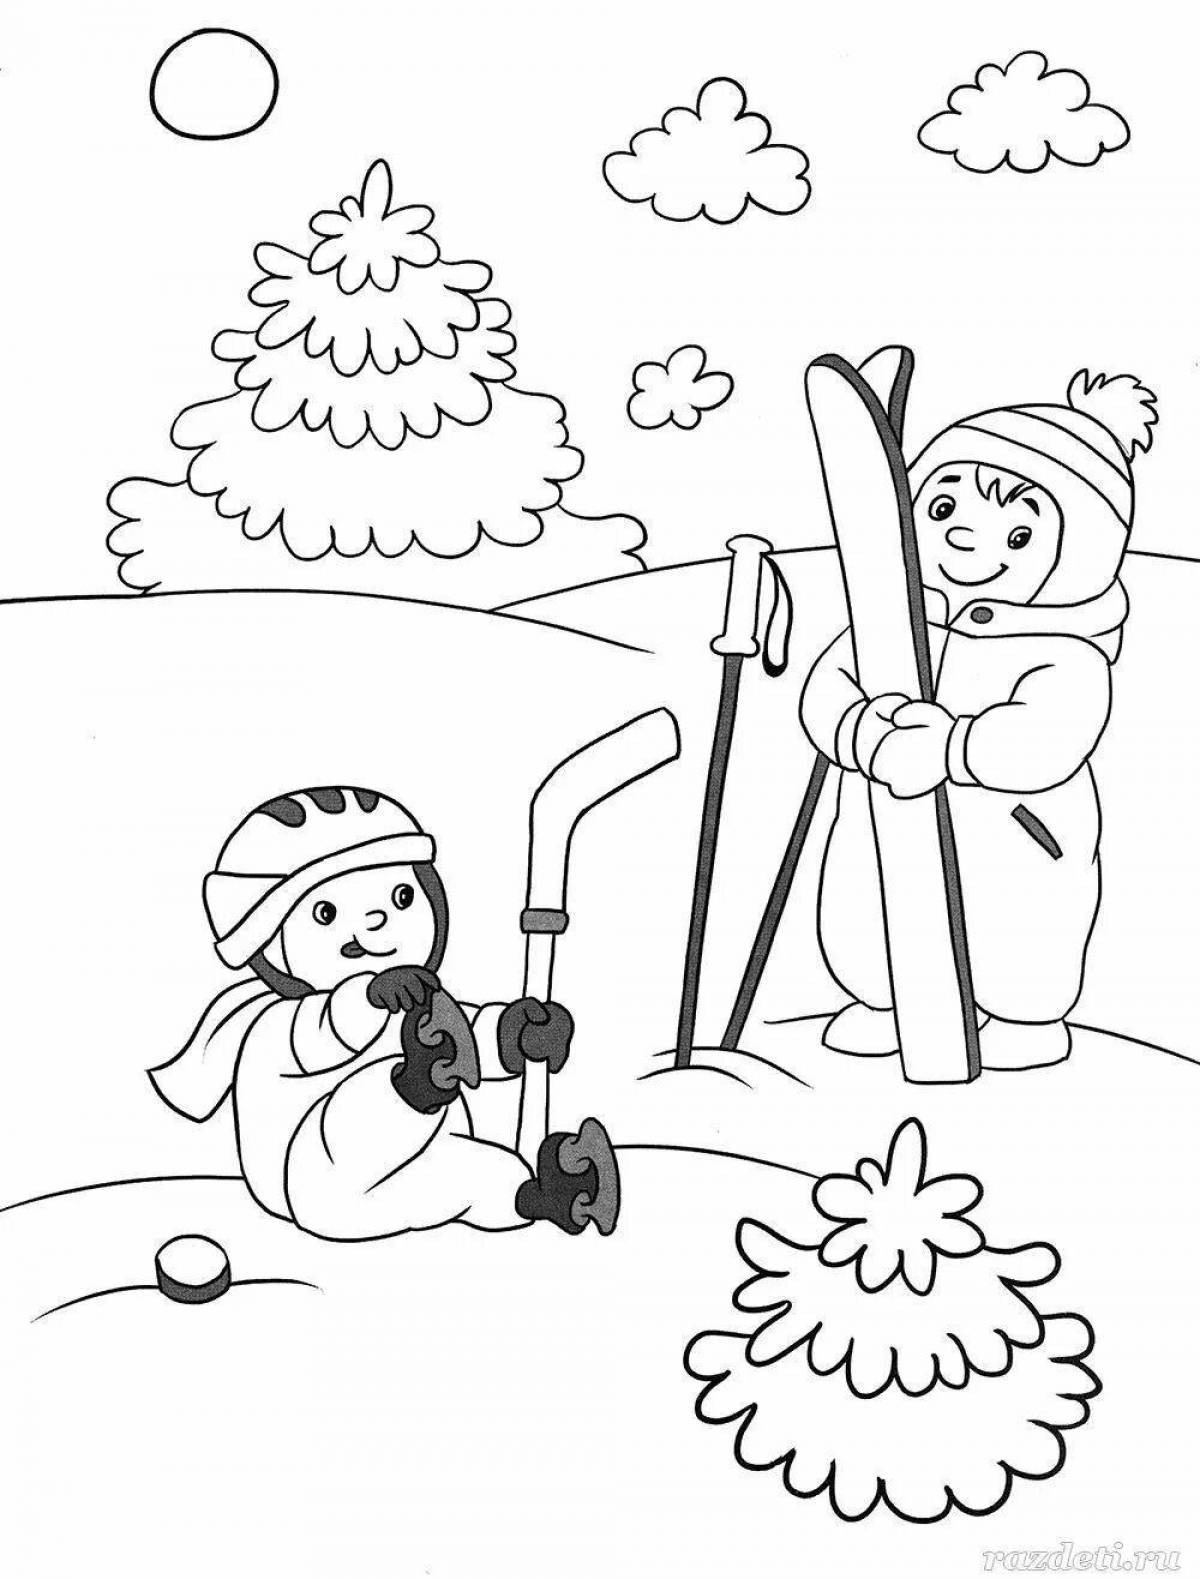 Holiday coloring book winter fun for kids